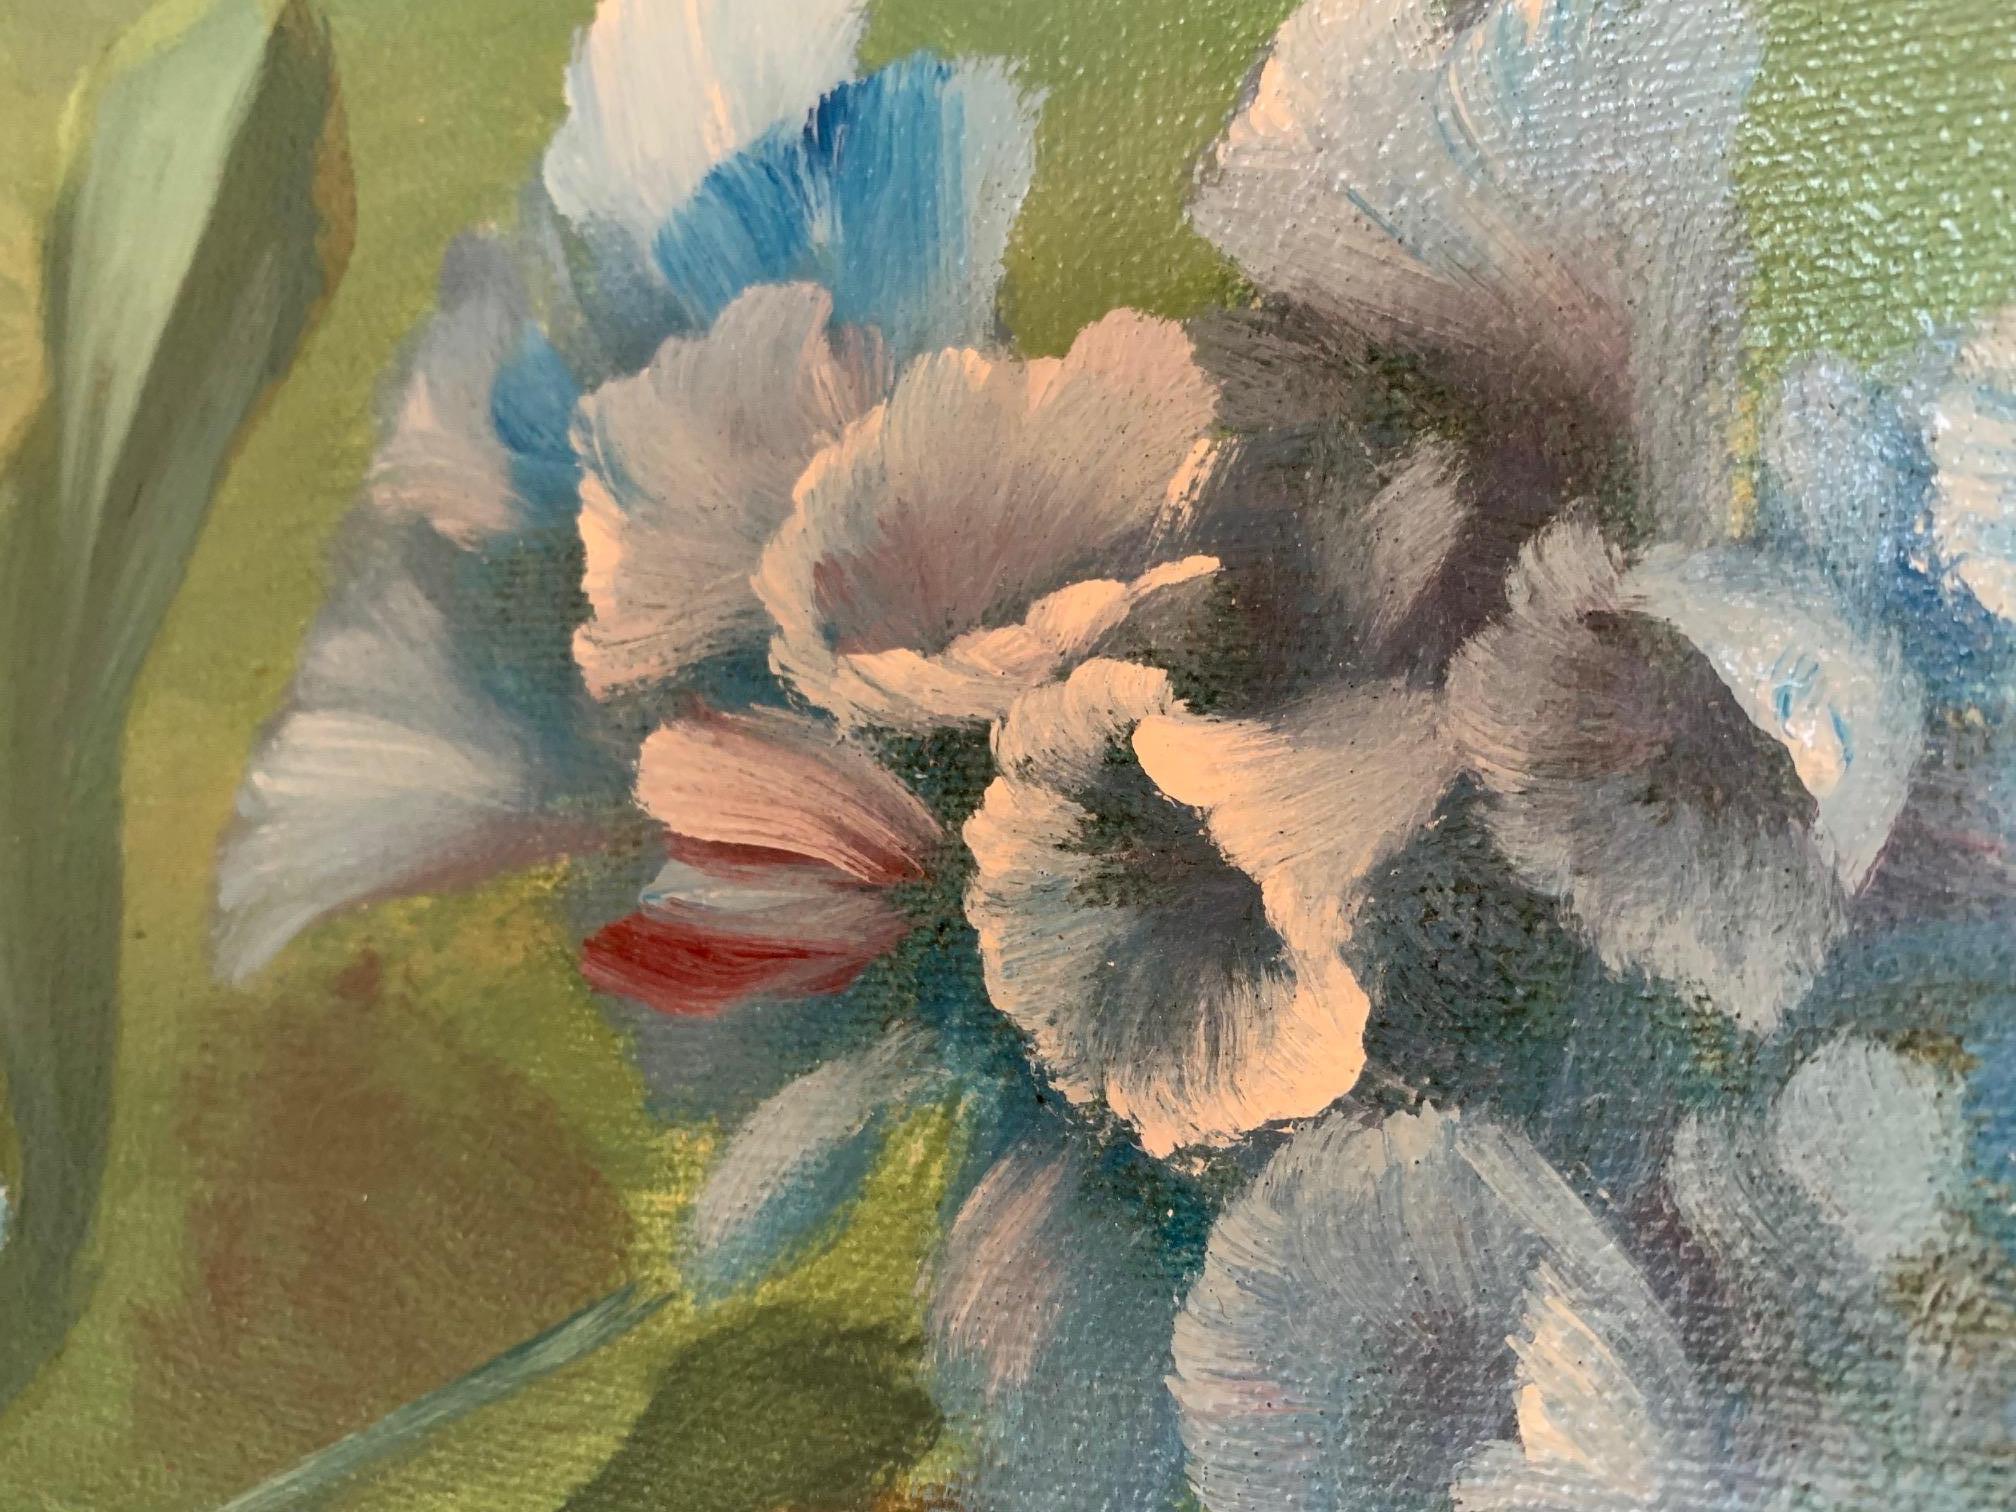 Lovely large square oil on canvas painting of foxglove flowers with a blurry ethereal background and lovely color palette of acid greens, blues and white. Signed lower right, H Simpson. Frame is a simple silver metal molding with some minor wear.